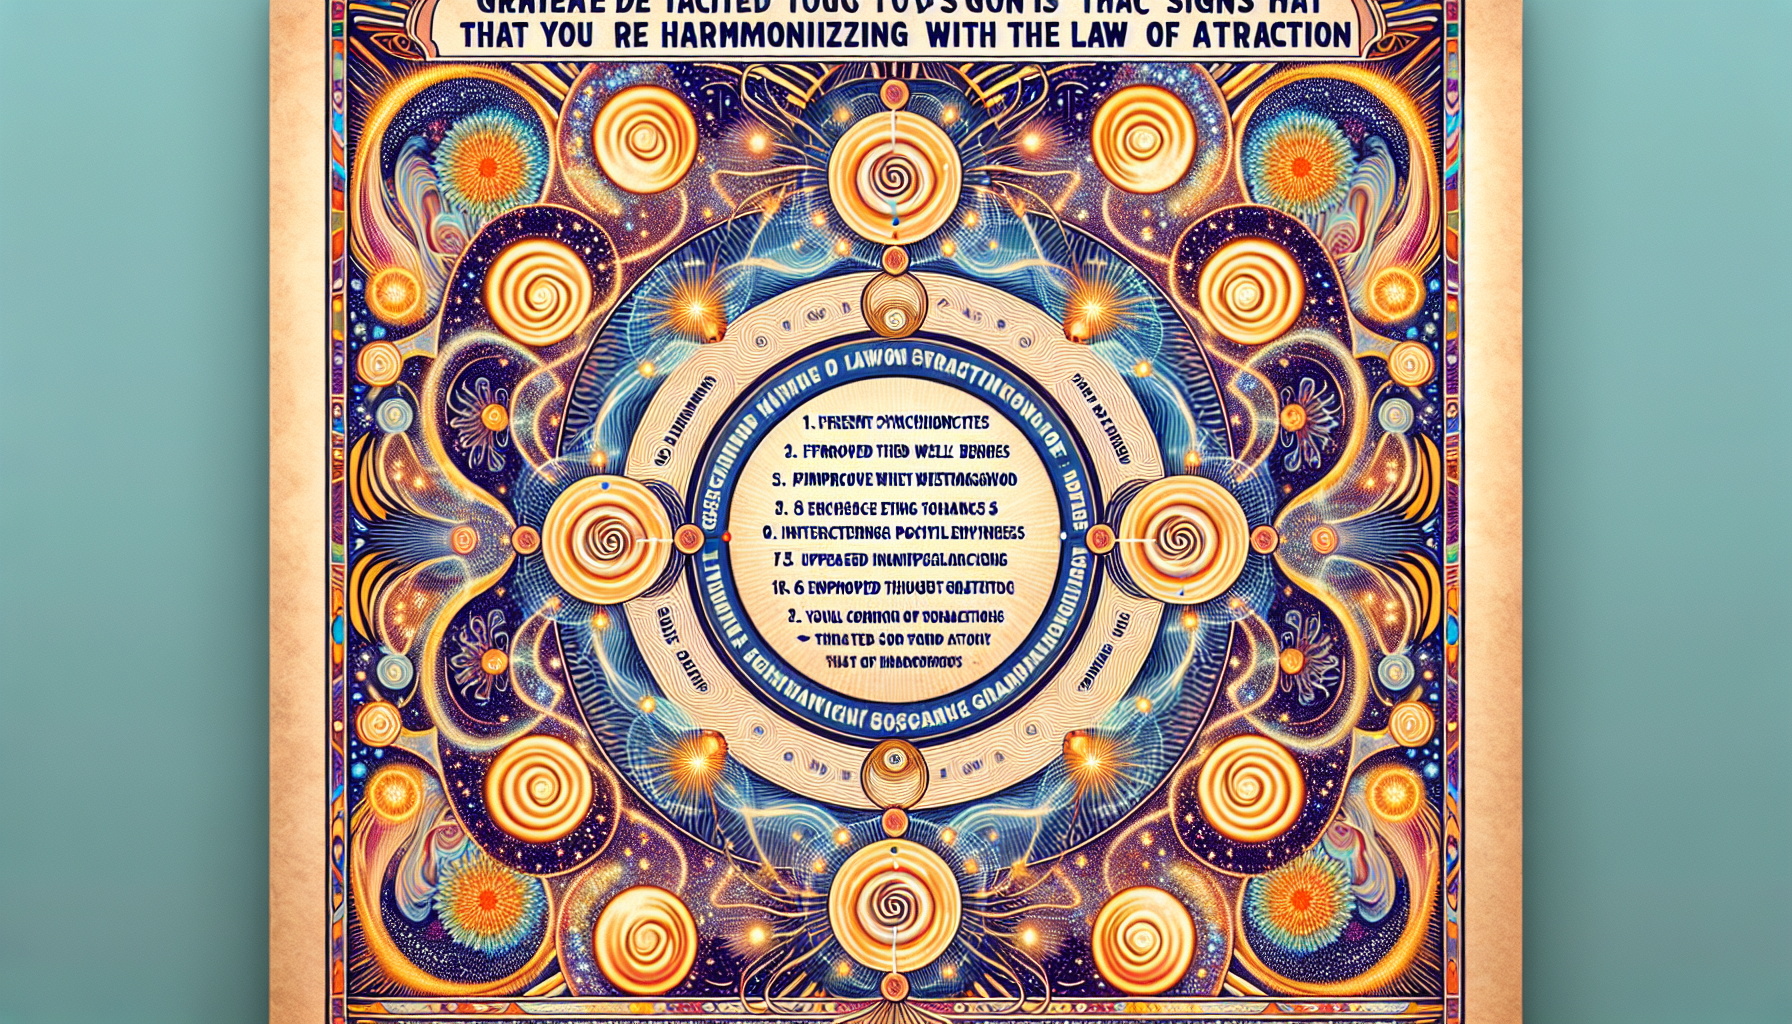 Generate a detailed image depicting a poster with a list of the top 10 signs that one is harmonizing with the Law of Attraction. This list could include manifestations such as frequent synchronicities, positive mindset, improved well-being, and an increased sense of gratitude. The background of the poster can be filled with harmonious patterns related to the Law of Attraction such as intertwined energy waves, radiant orbs, or visual manifestations thought waves. The overall theme of the poster should be uplifting and inspirational.